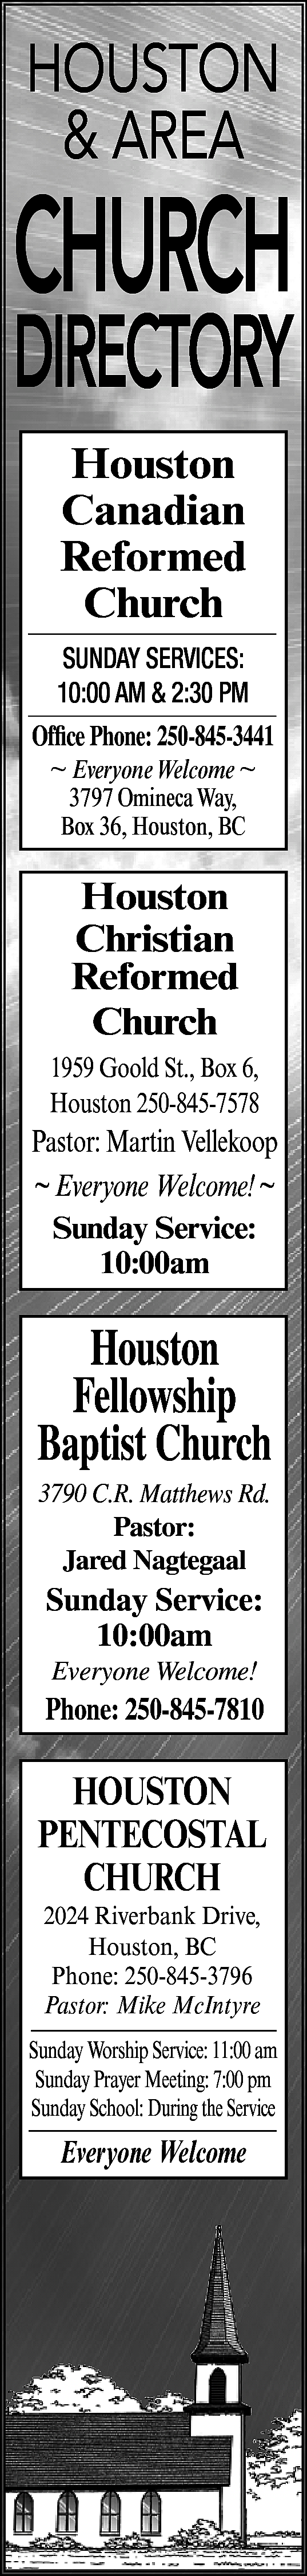 HOUSTON <br>& AREA <br> <br>CHURCH  HOUSTON  & AREA    CHURCH    DIRECTORY  Houston  Canadian  Reformed  Church  SUNDAY SERVICES:  10:00 AM & 2:30 PM  Office Phone: 250-845-3441  ~ Everyone Welcome ~  3797 Omineca Way,  Box 36, Houston, BC    Houston  Christian  Reformed  Church  1959 Goold St., Box 6,  Houston 250-845-7578    Pastor: Martin Vellekoop  ~ Everyone Welcome! ~  Sunday Service:  10:00am    Houston  Fellowship  Baptist Church  3790 C.R. Matthews Rd.  Pastor:  Jared Nagtegaal    Sunday Service:  10:00am  Everyone Welcome!    Phone: 250-845-7810    HOUSTON  PENTECOSTAL  CHURCH  2024 Riverbank Drive,  Houston, BC  Phone: 250-845-3796  Pastor: Mike McIntyre    Sunday Worship Service: 11:00 am  Sunday Prayer Meeting: 7:00 pm  Sunday School: During the Service    Everyone Welcome    